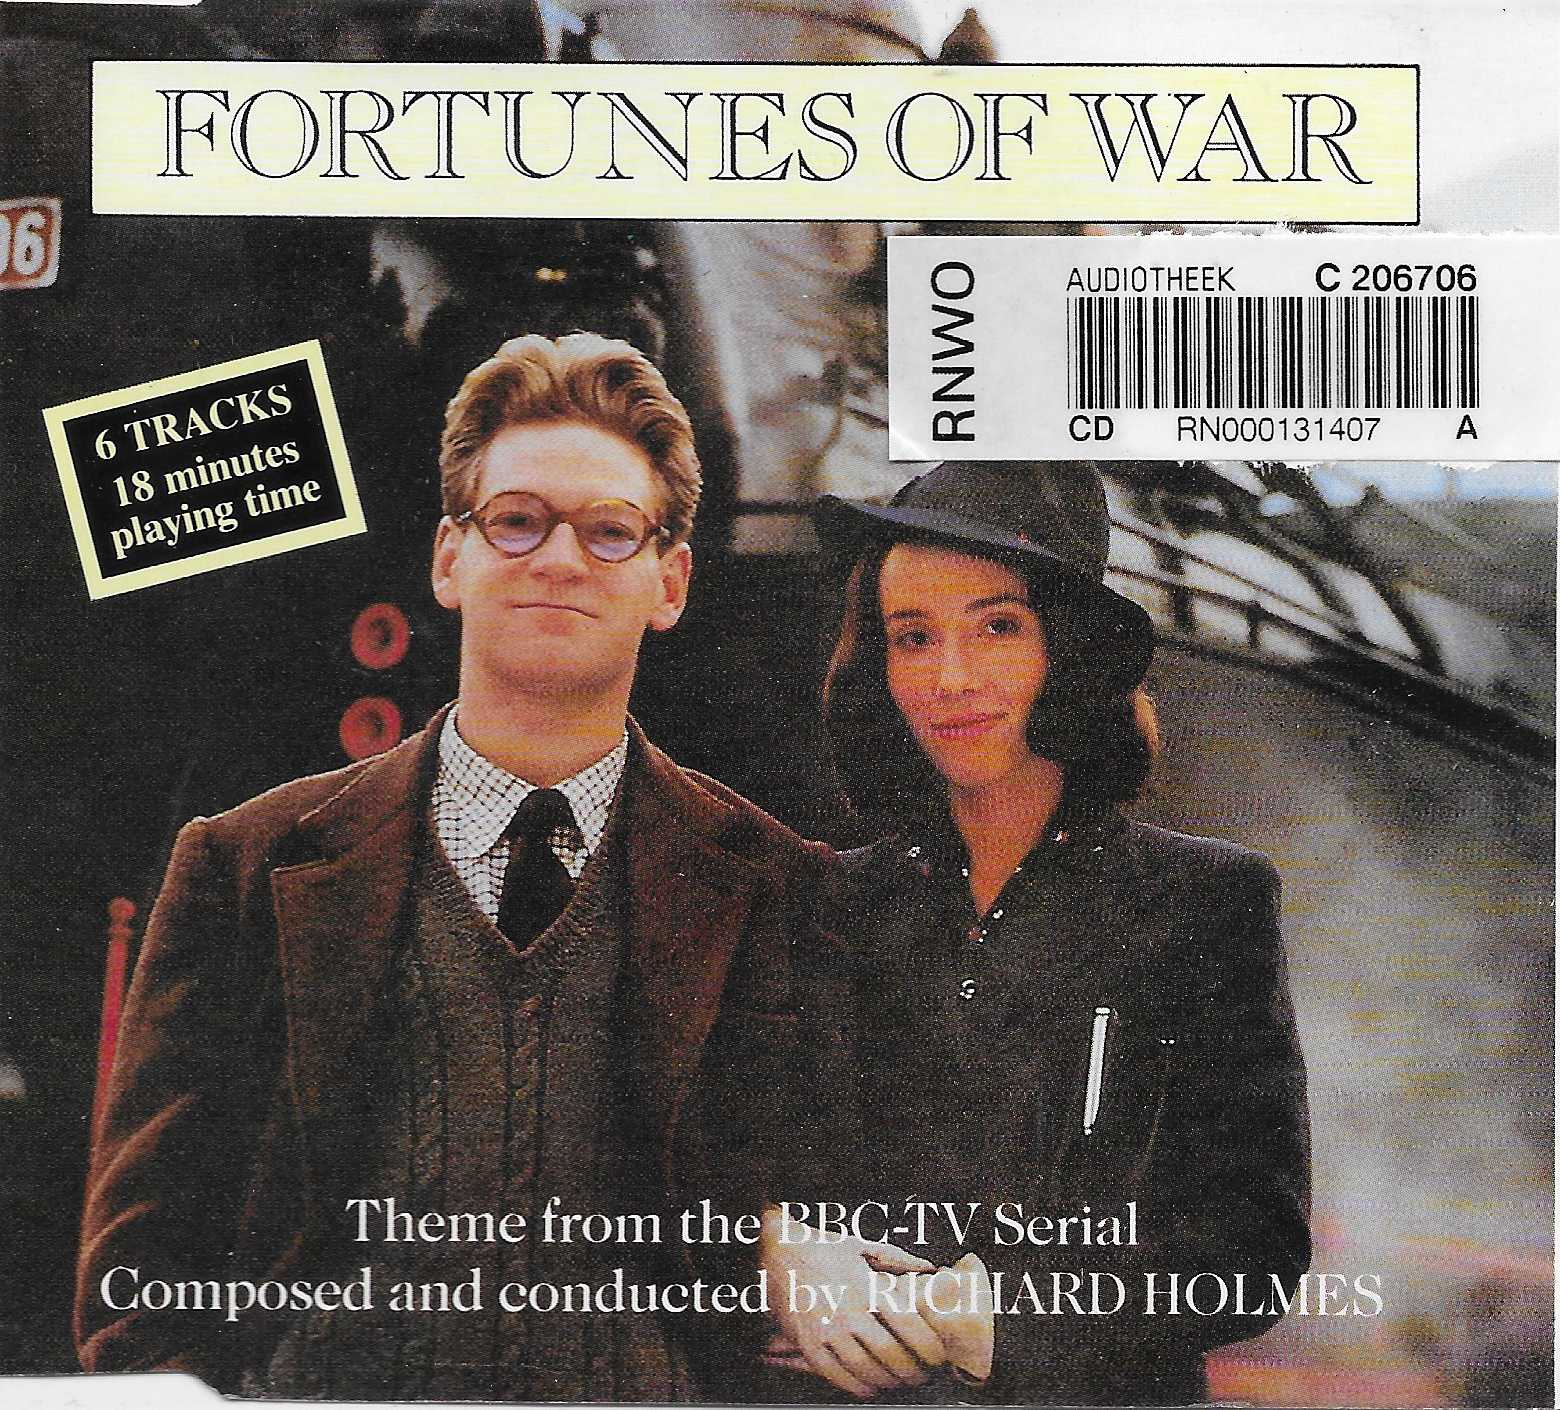 Picture of CD RSL 221 Fortunes of war by artist Richard Holmes from the BBC cdsingles - Records and Tapes library